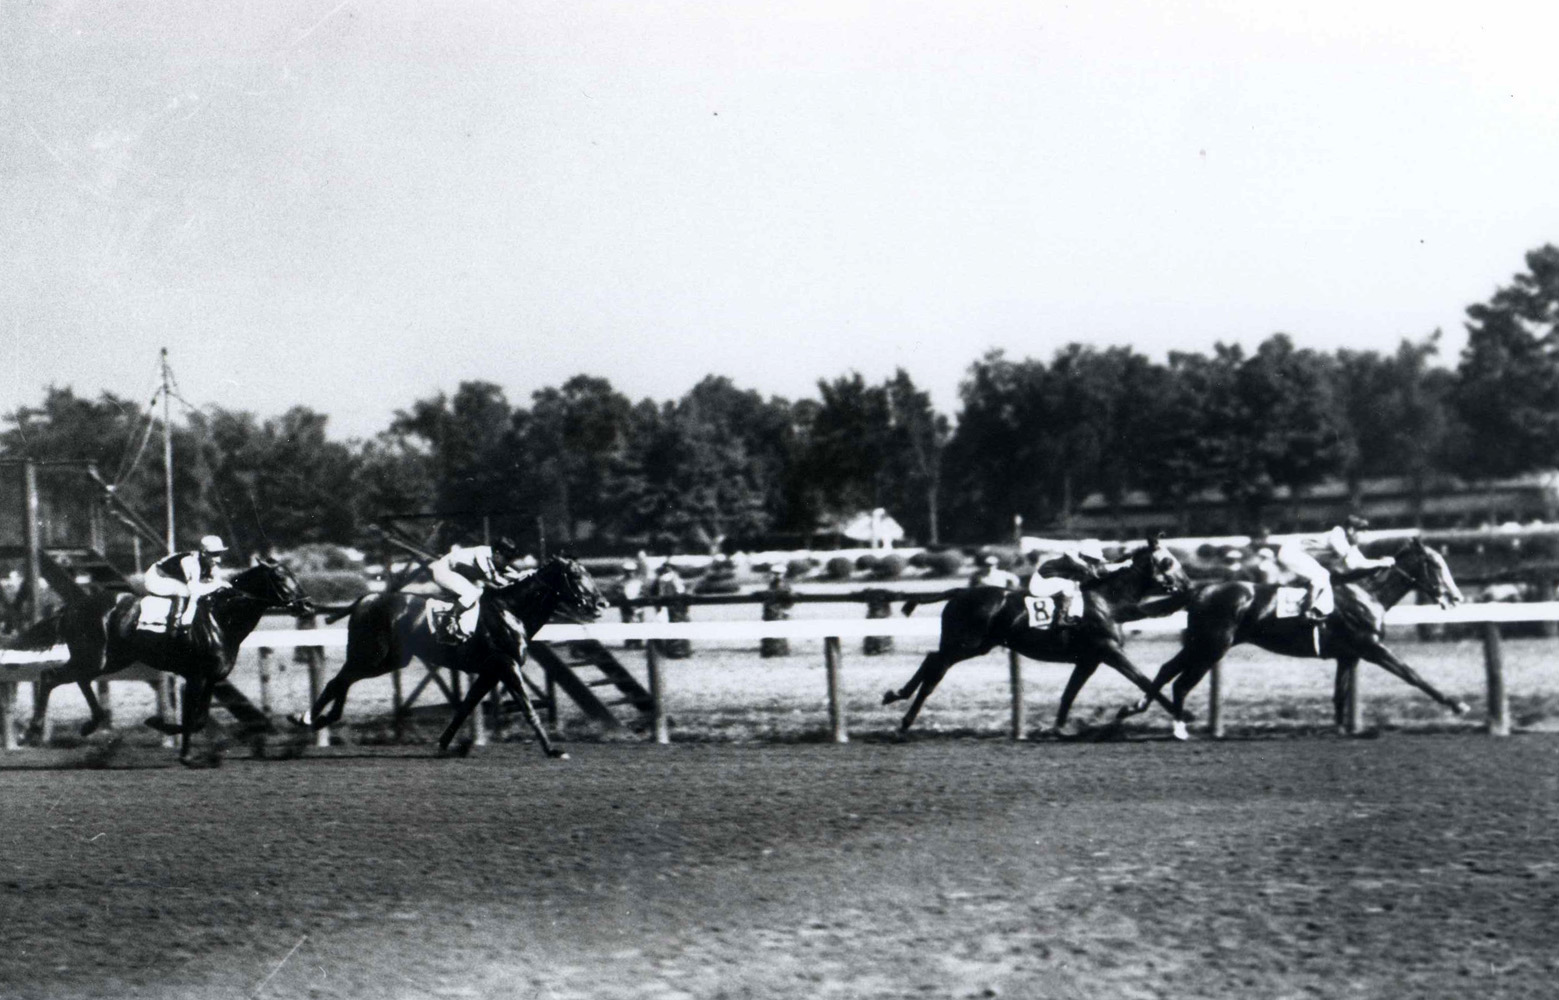 Top Flight (Raymond Workman up) winning the 1931 Saratoga Special (Keeneland Library Cook Collection/Museum Collection)